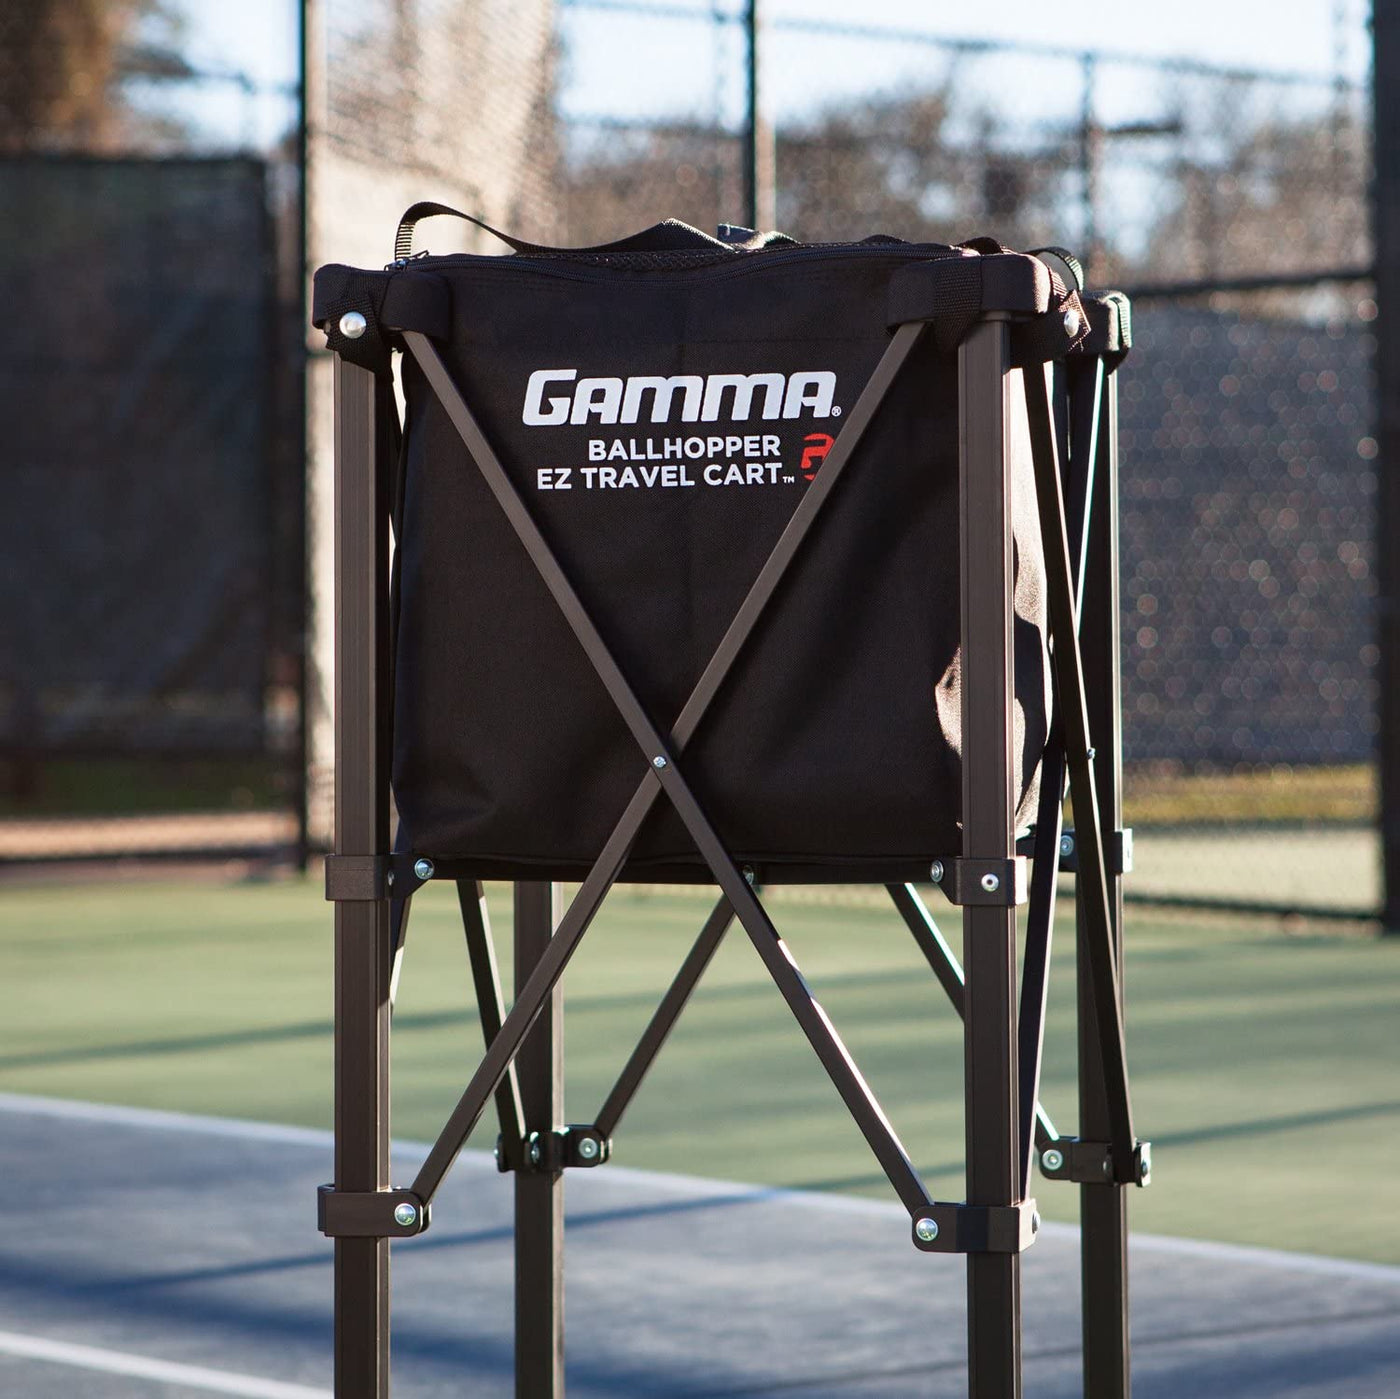 Gamma Sports EZ Travel Cart Pro, Portable Compact Design, Sturdy Lightweight Construction, 150 or 250 Capacity Available, Premium Carrying Case Included